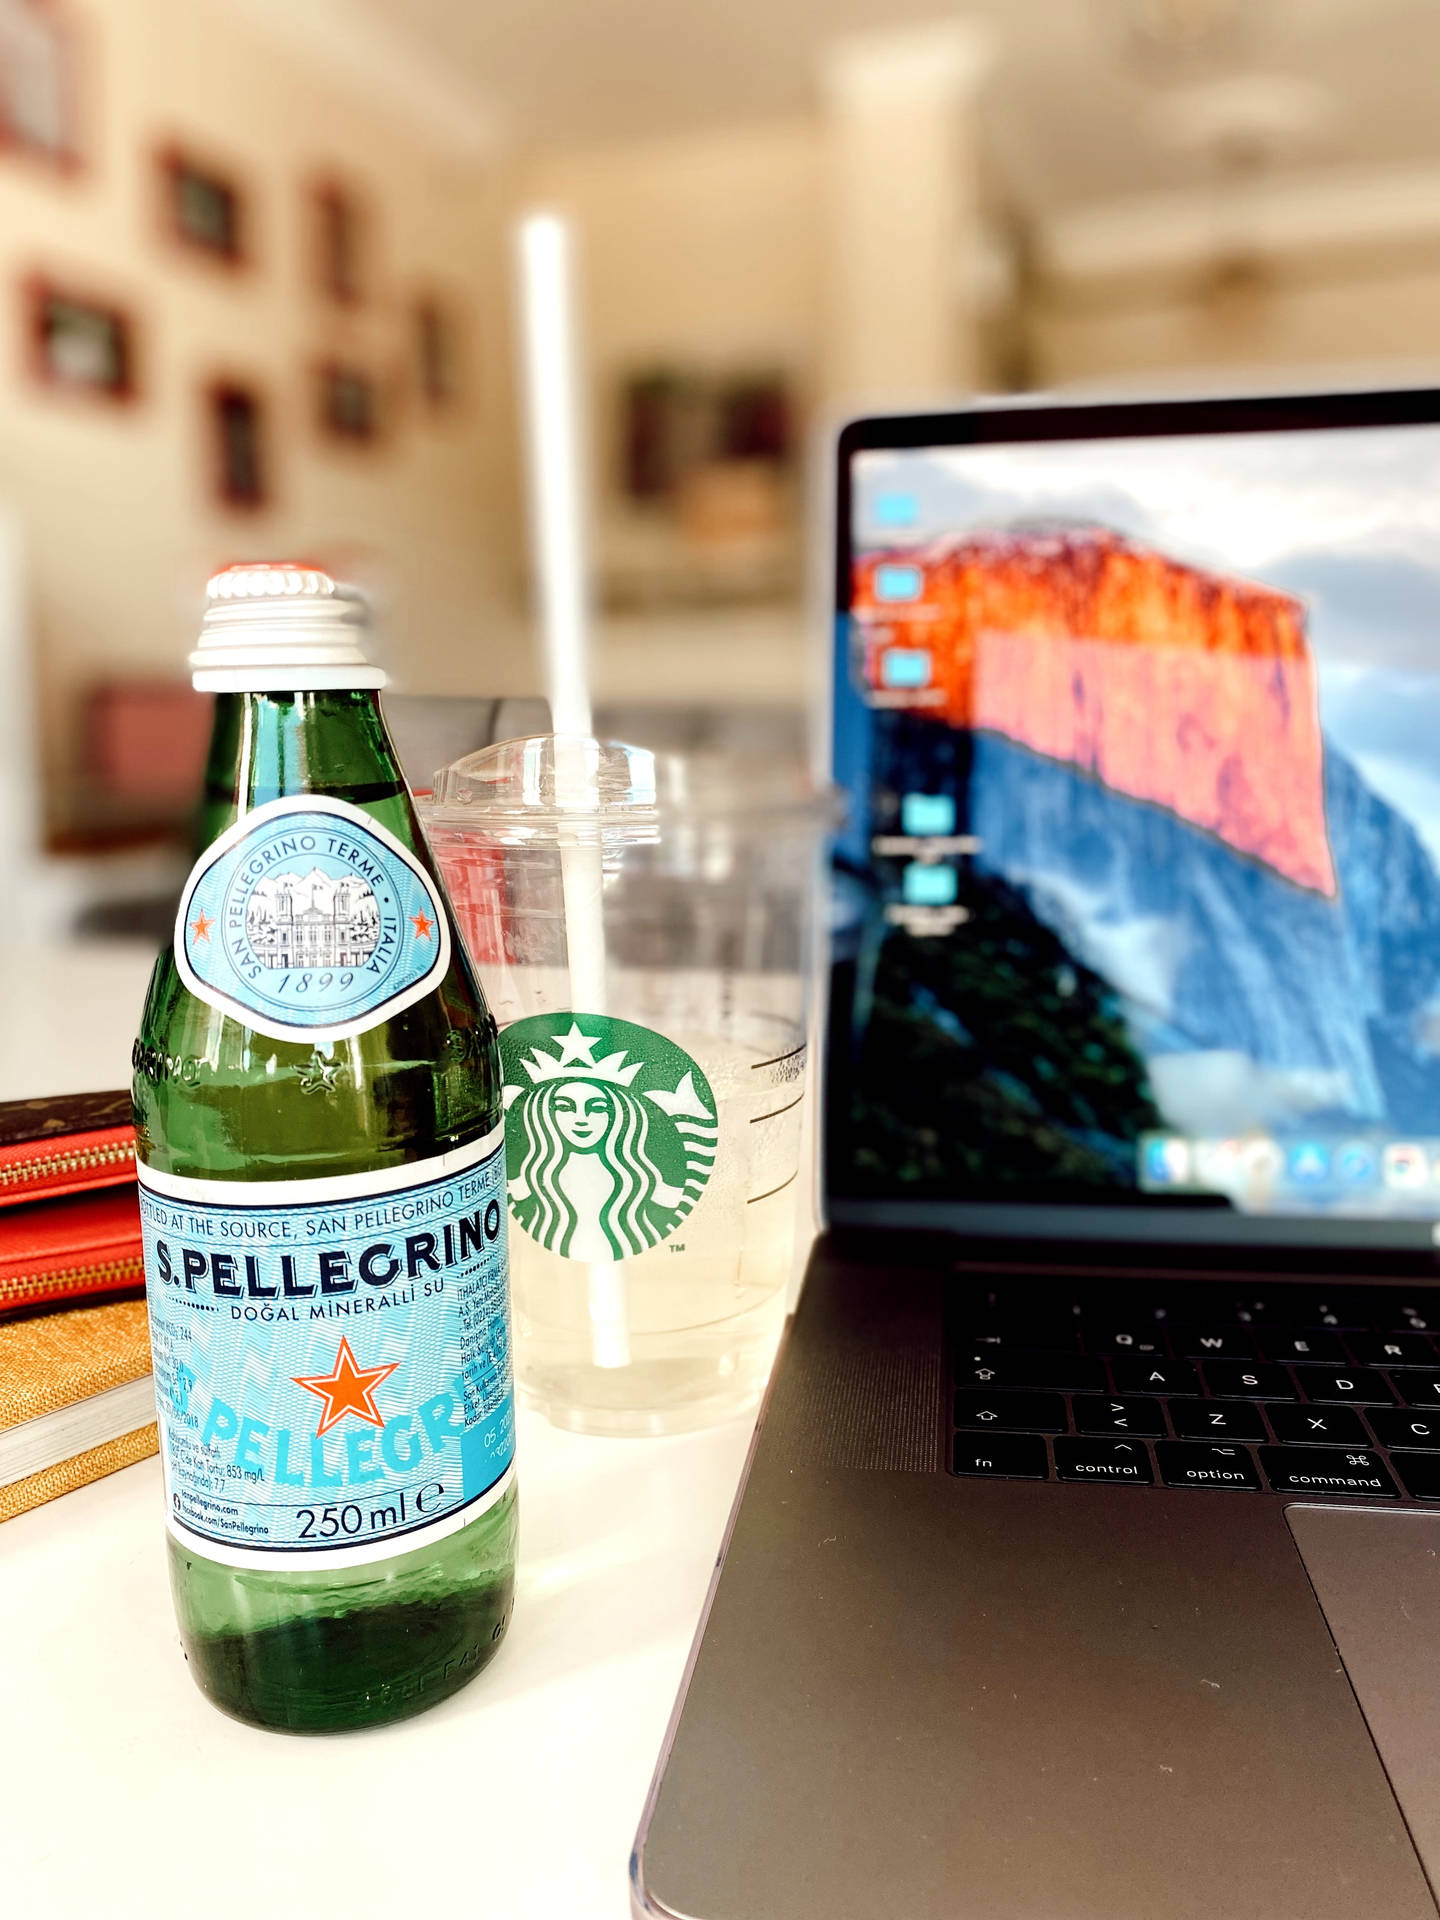 Aesthetic Tumblr Laptop Sparkling Water Background